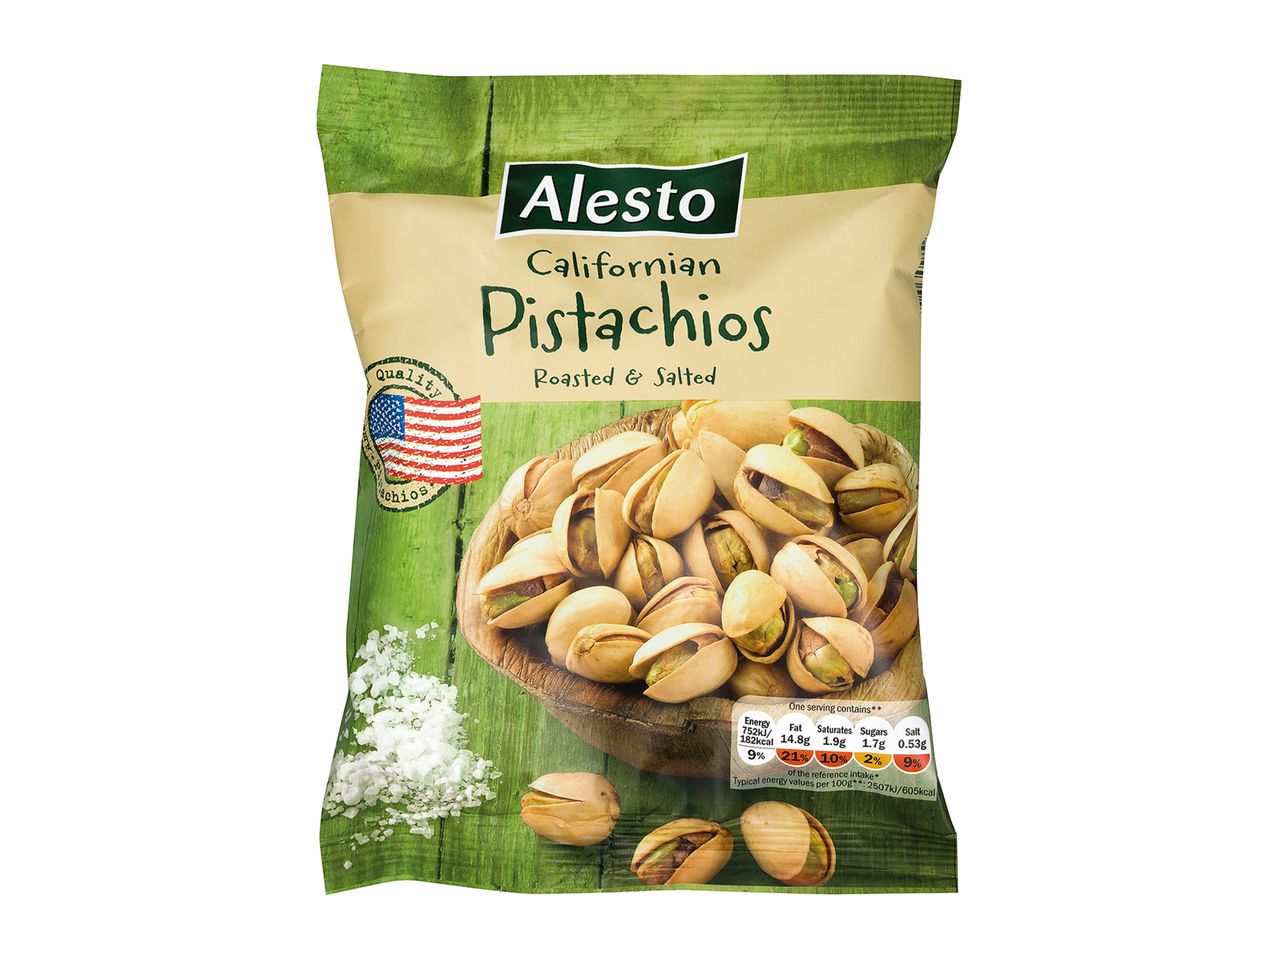 Go to full screen view: Alesto Californian Pistachios Roasted & Salted - Image 1